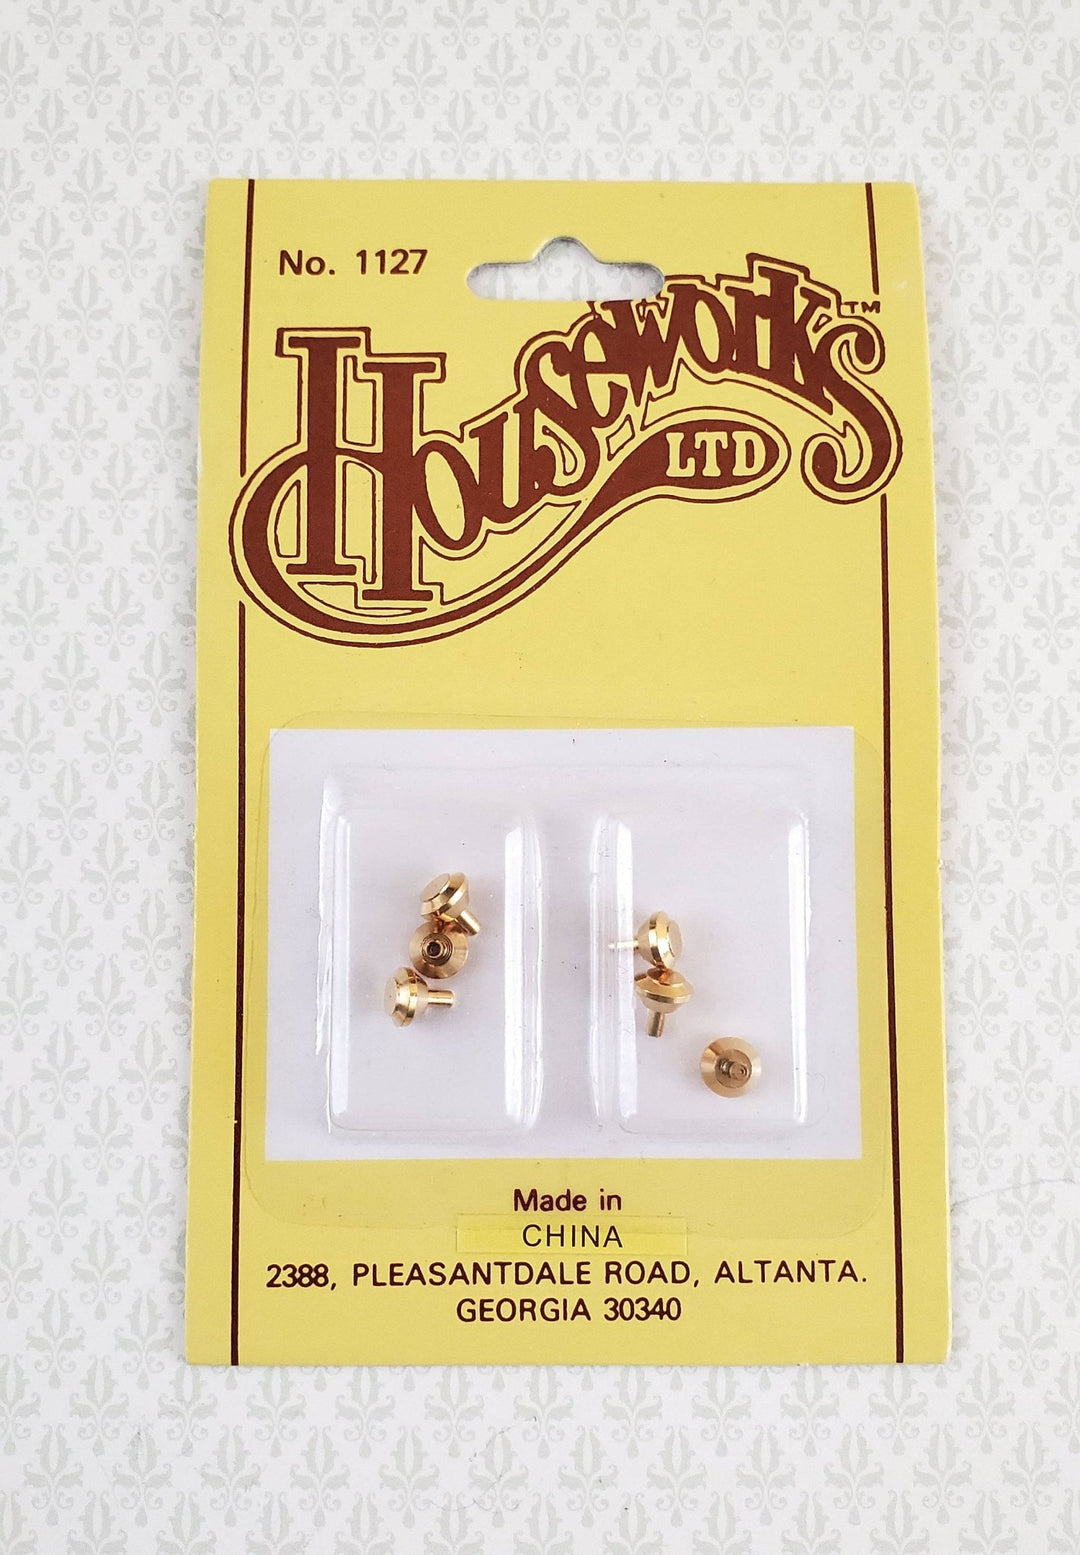 Dollhouse Miniature Tiny Gold Brass Knobs for Door or Drawer Pulls Set of 6 1:12 Scale Houseworks #1127 - Miniature Crush